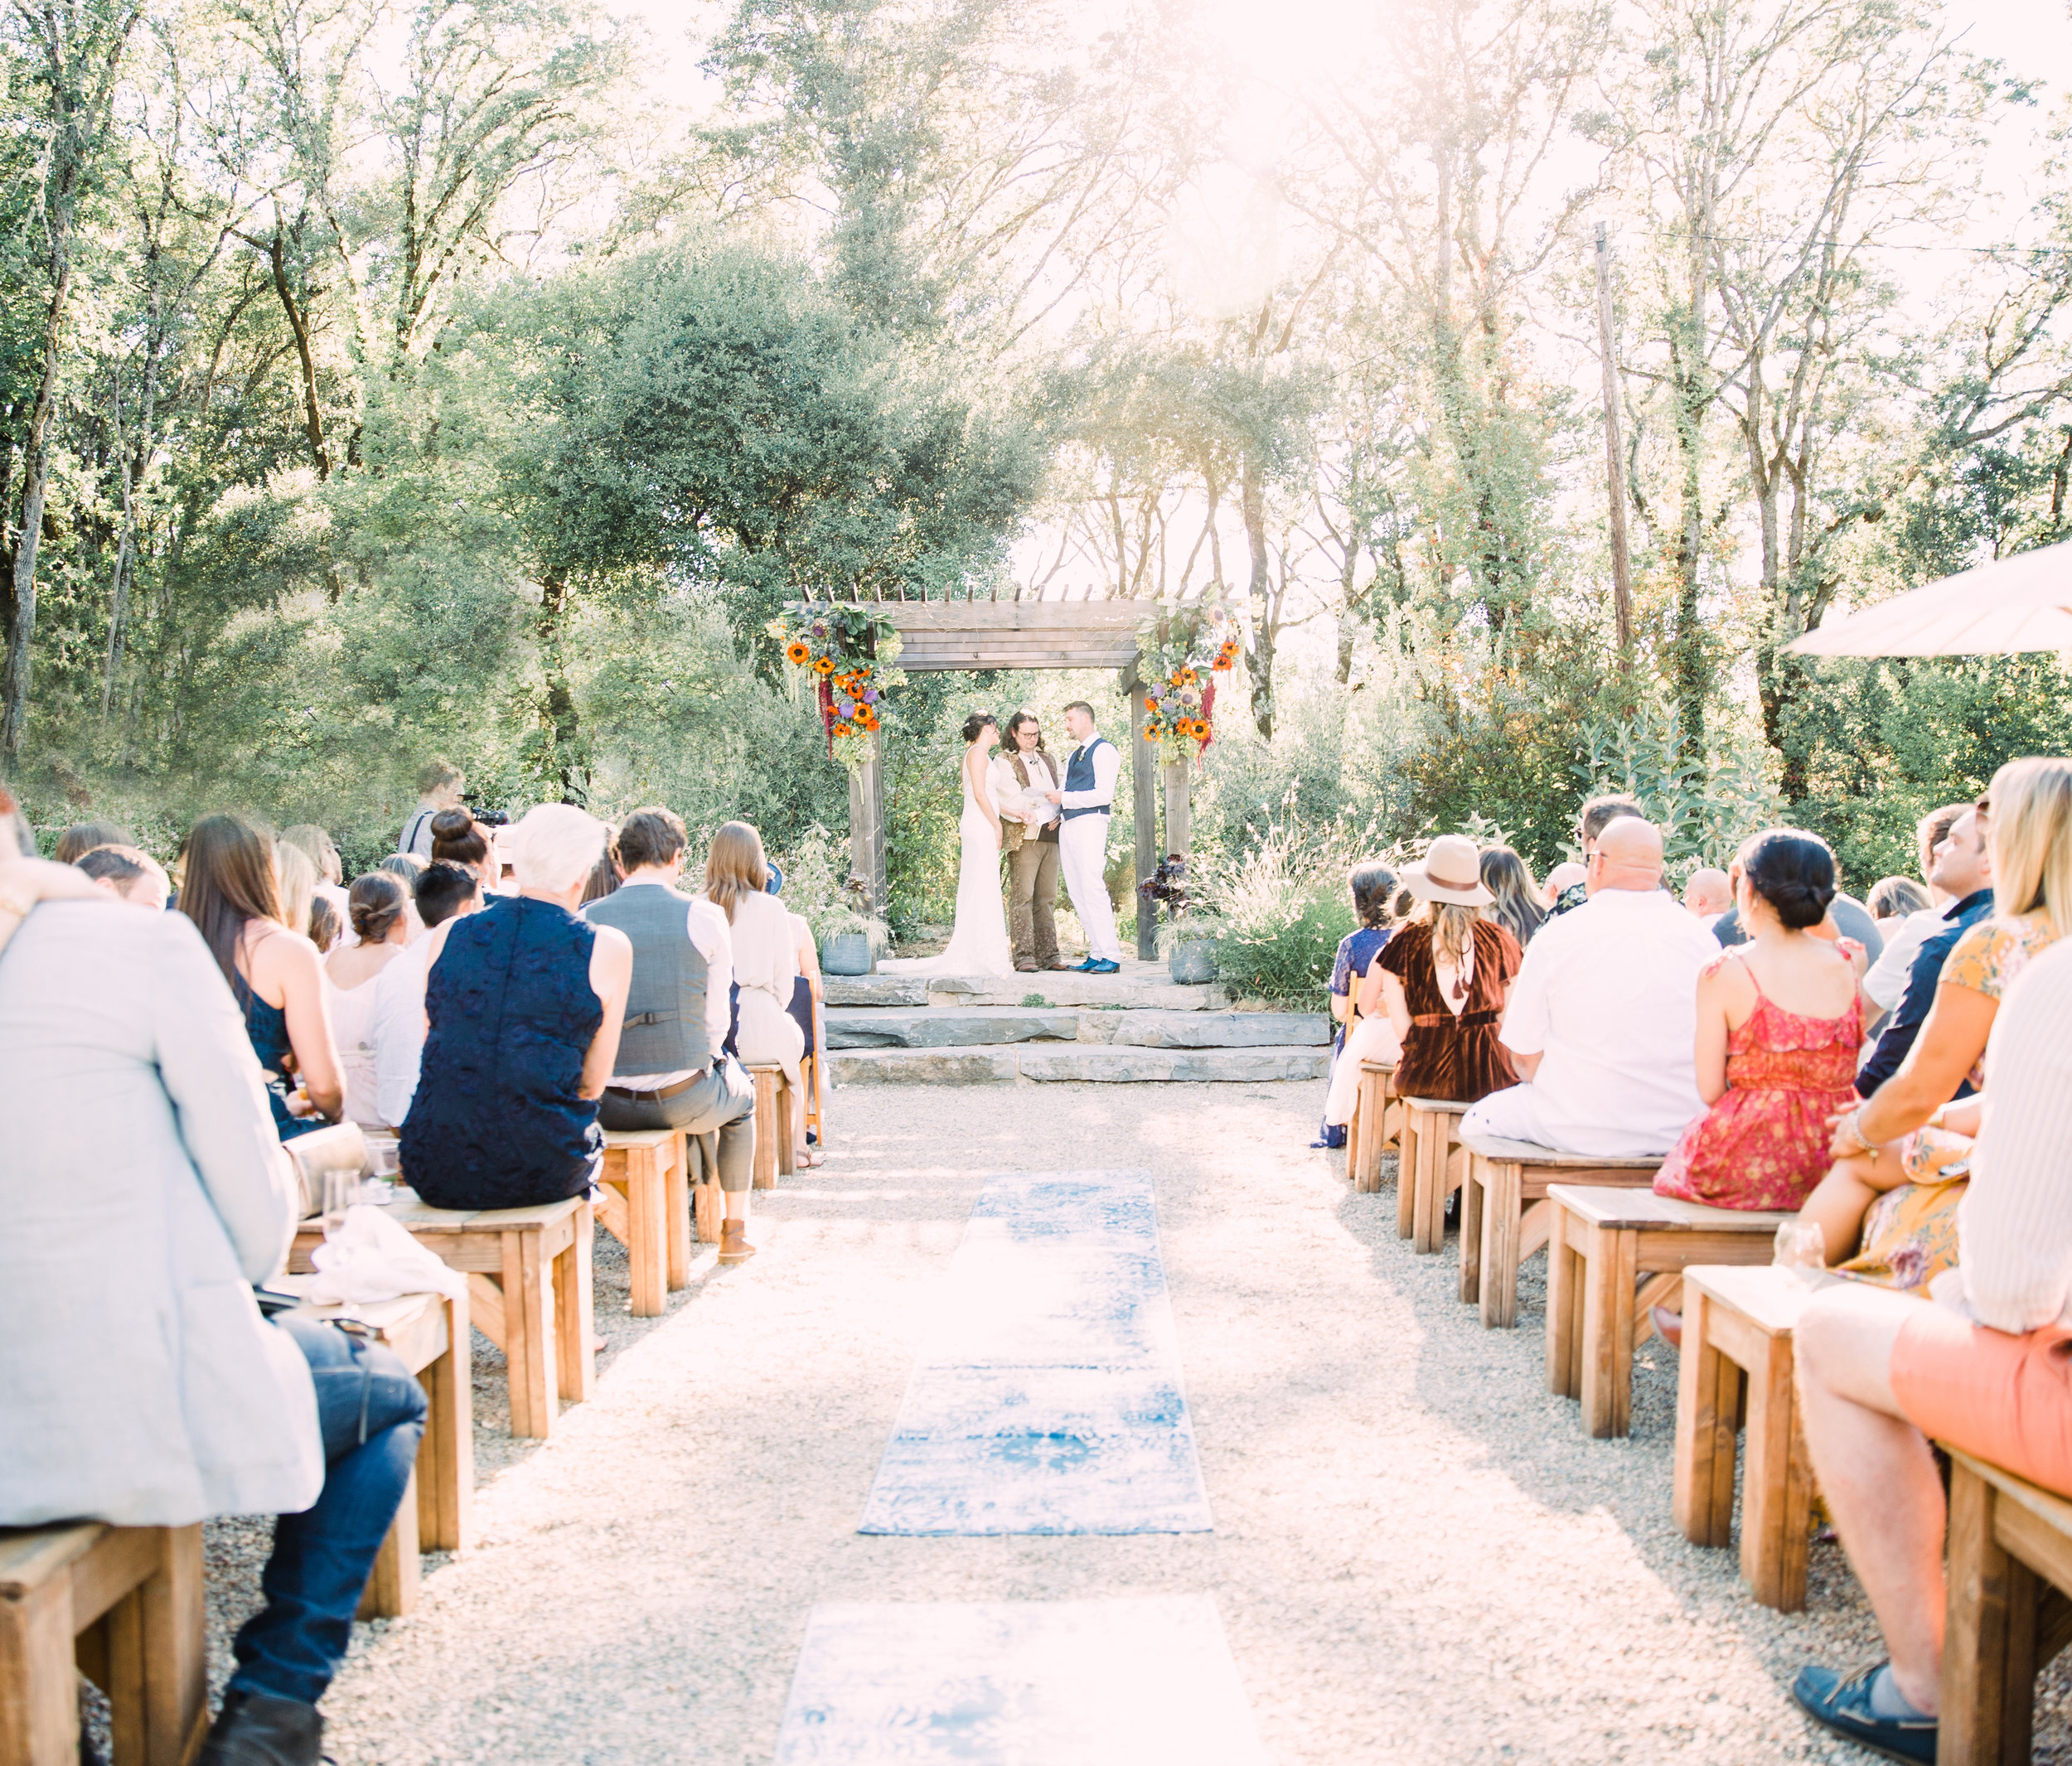 Epic wedding in Mendocino County with fairytale forest vibes